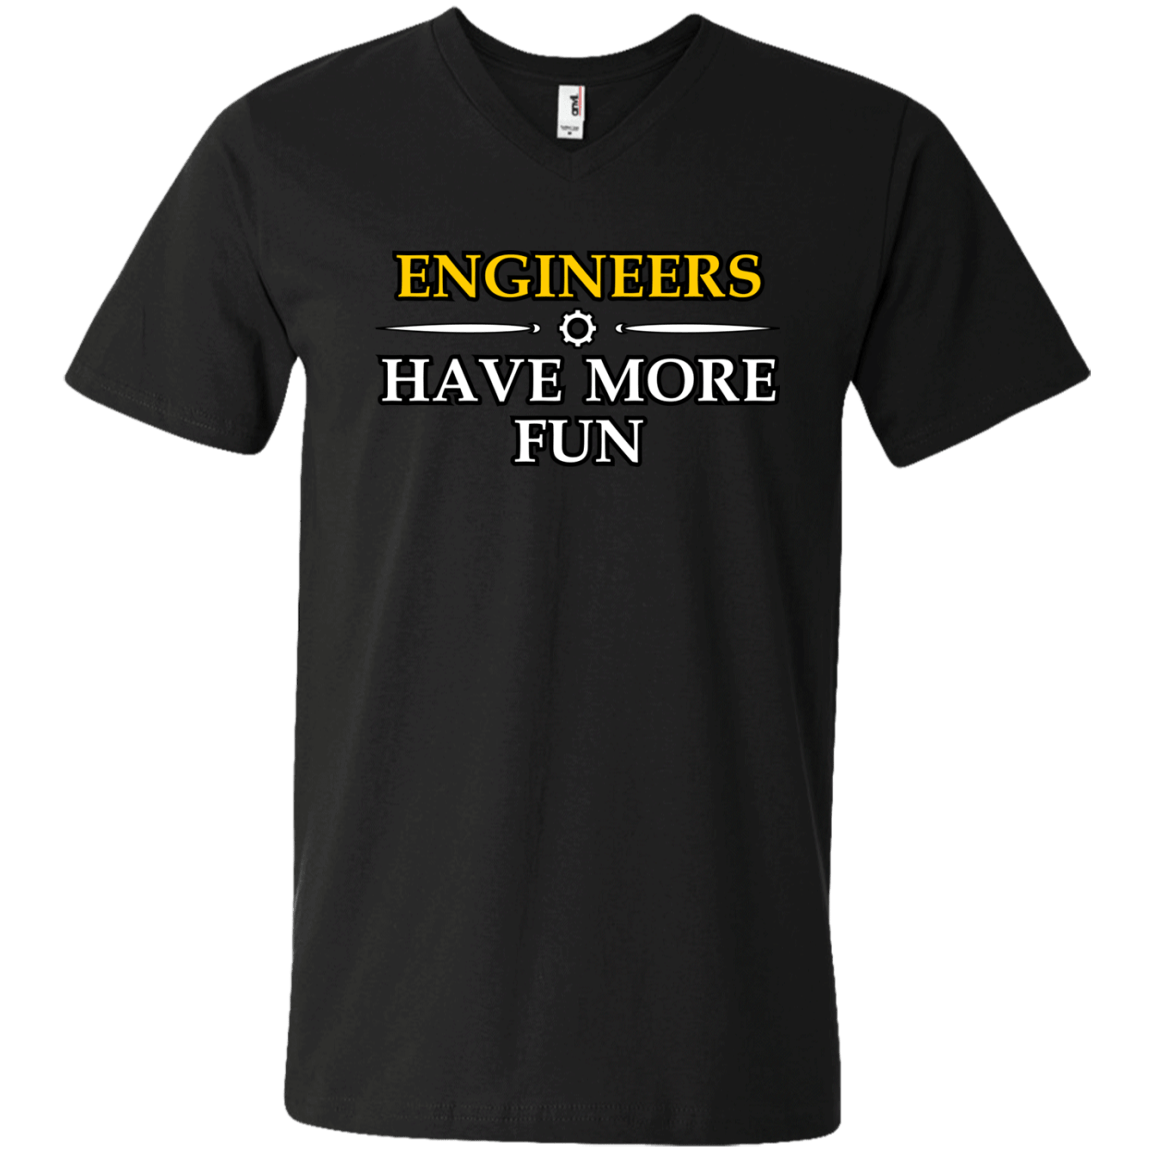 Engineers Have More Fun - Engineering Outfitters